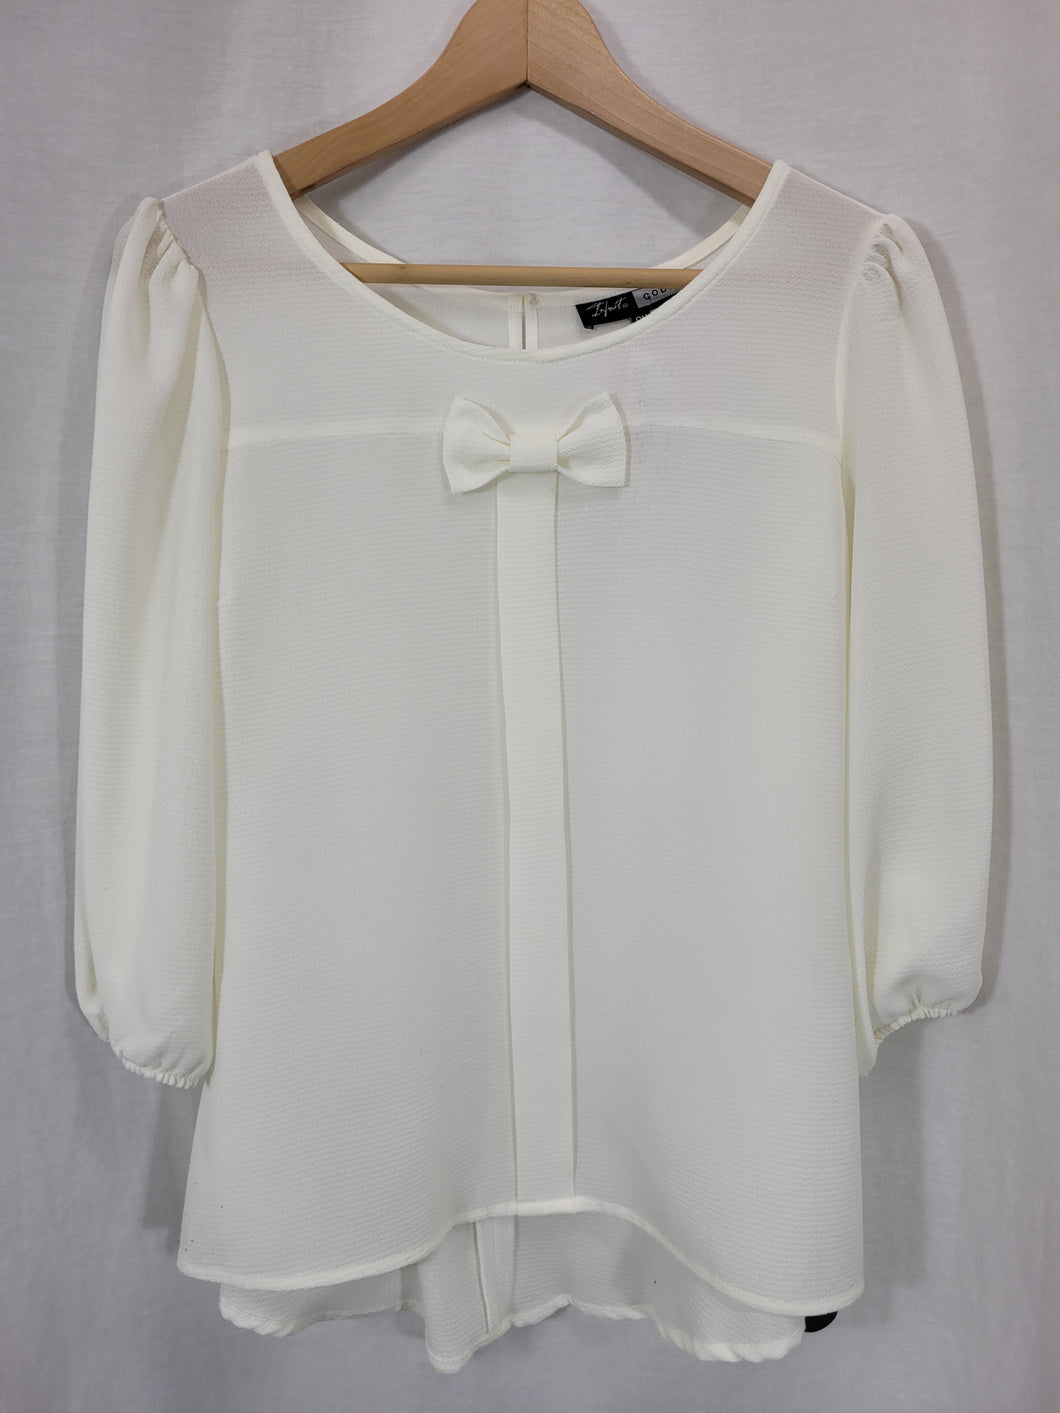 Infinit, Blouse - Size Small